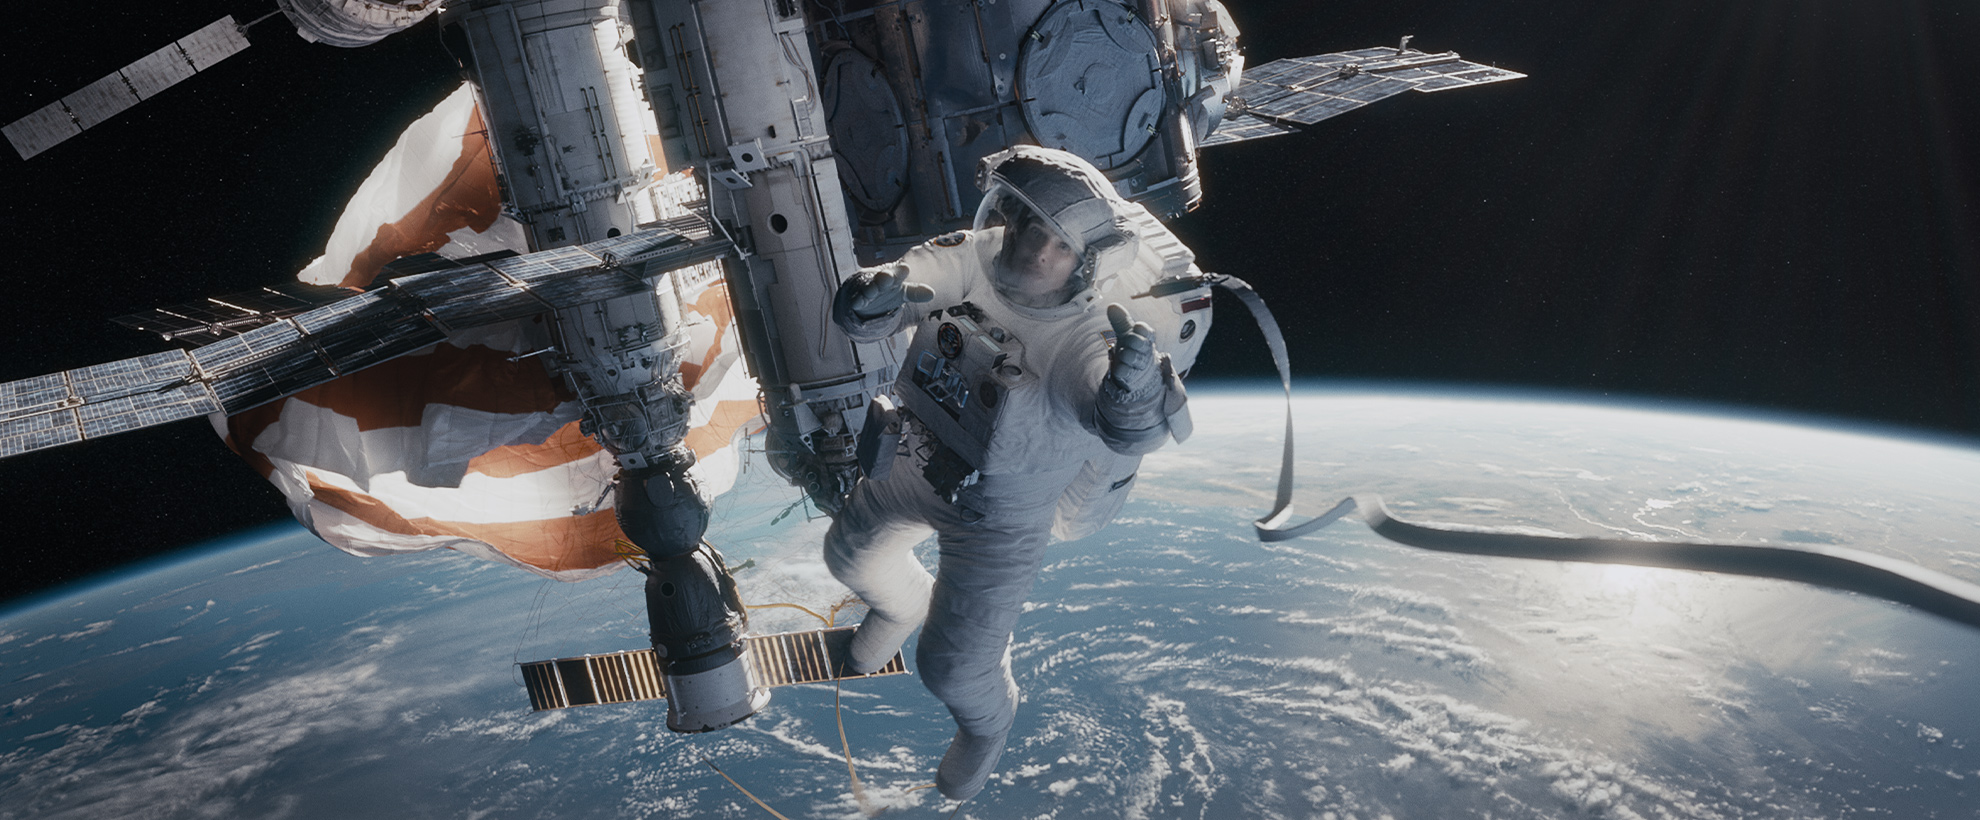 Sandra Bullock in Gravity, floating in space, reaching for a rope